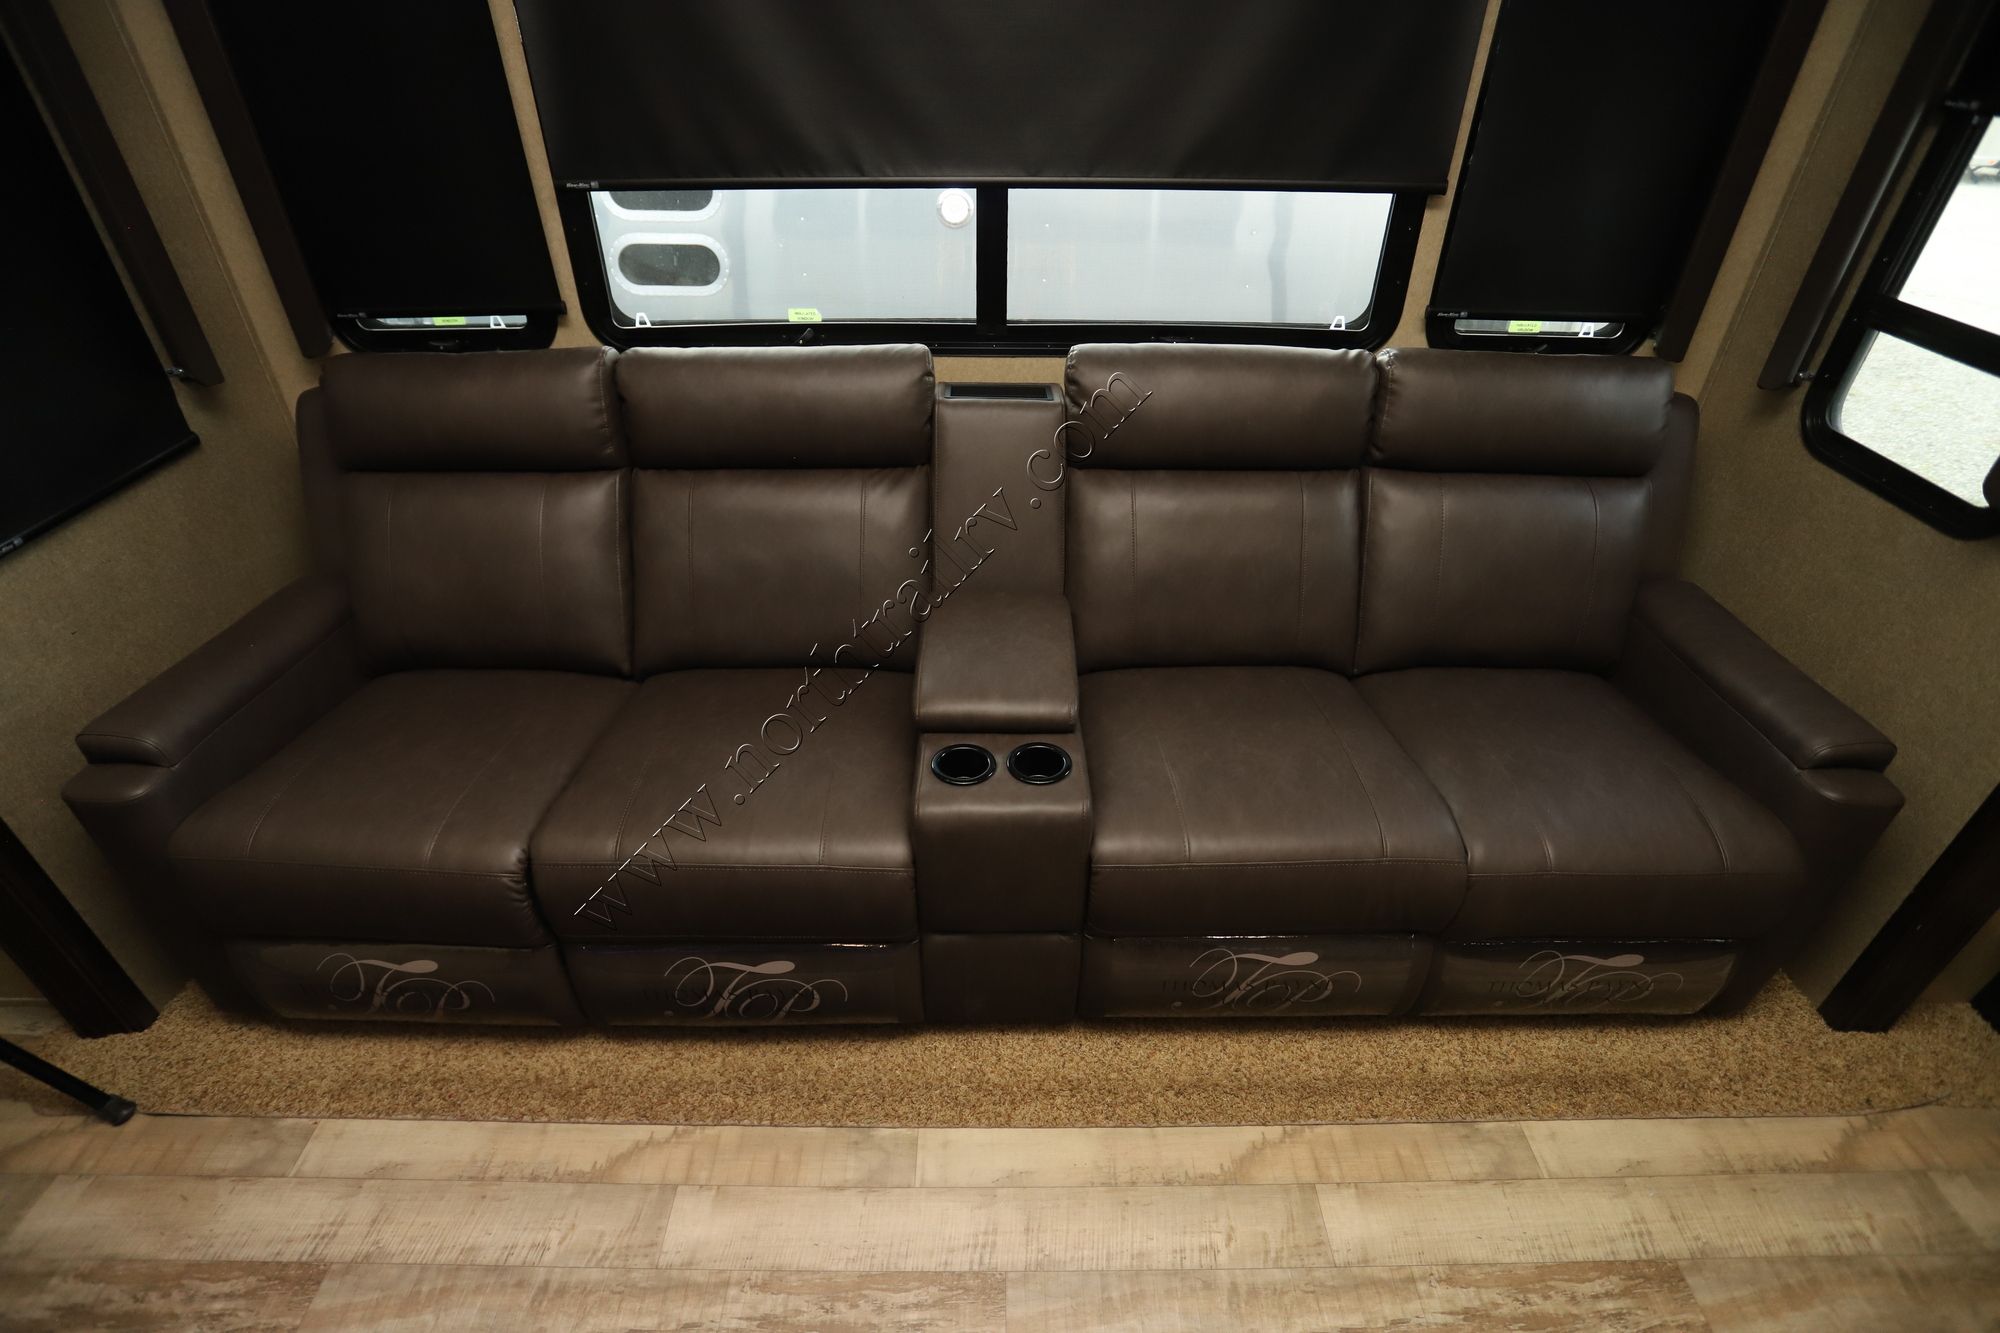 Used 2017 Forest River Xlr Thunderbolt 413 AMP Fifth Wheel  For Sale